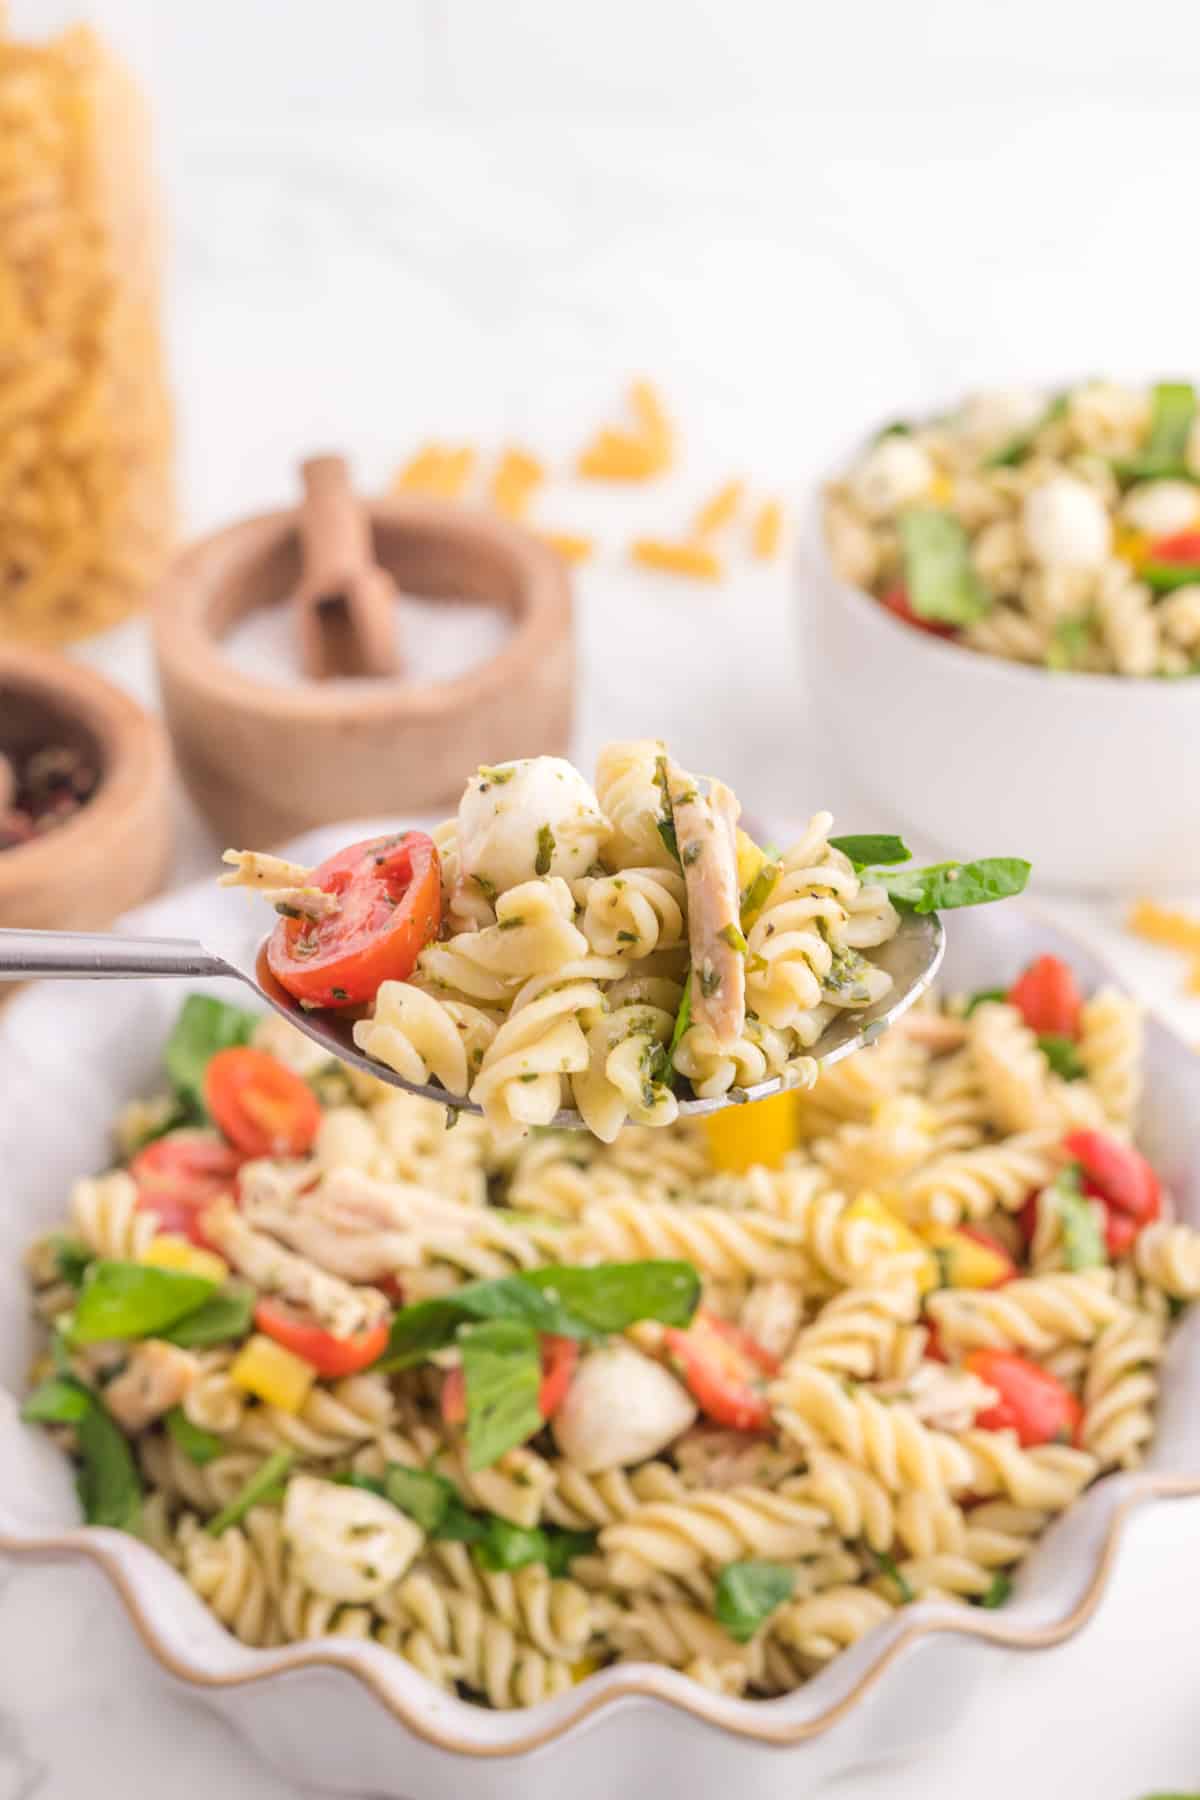 Spoonful with pasta salad.